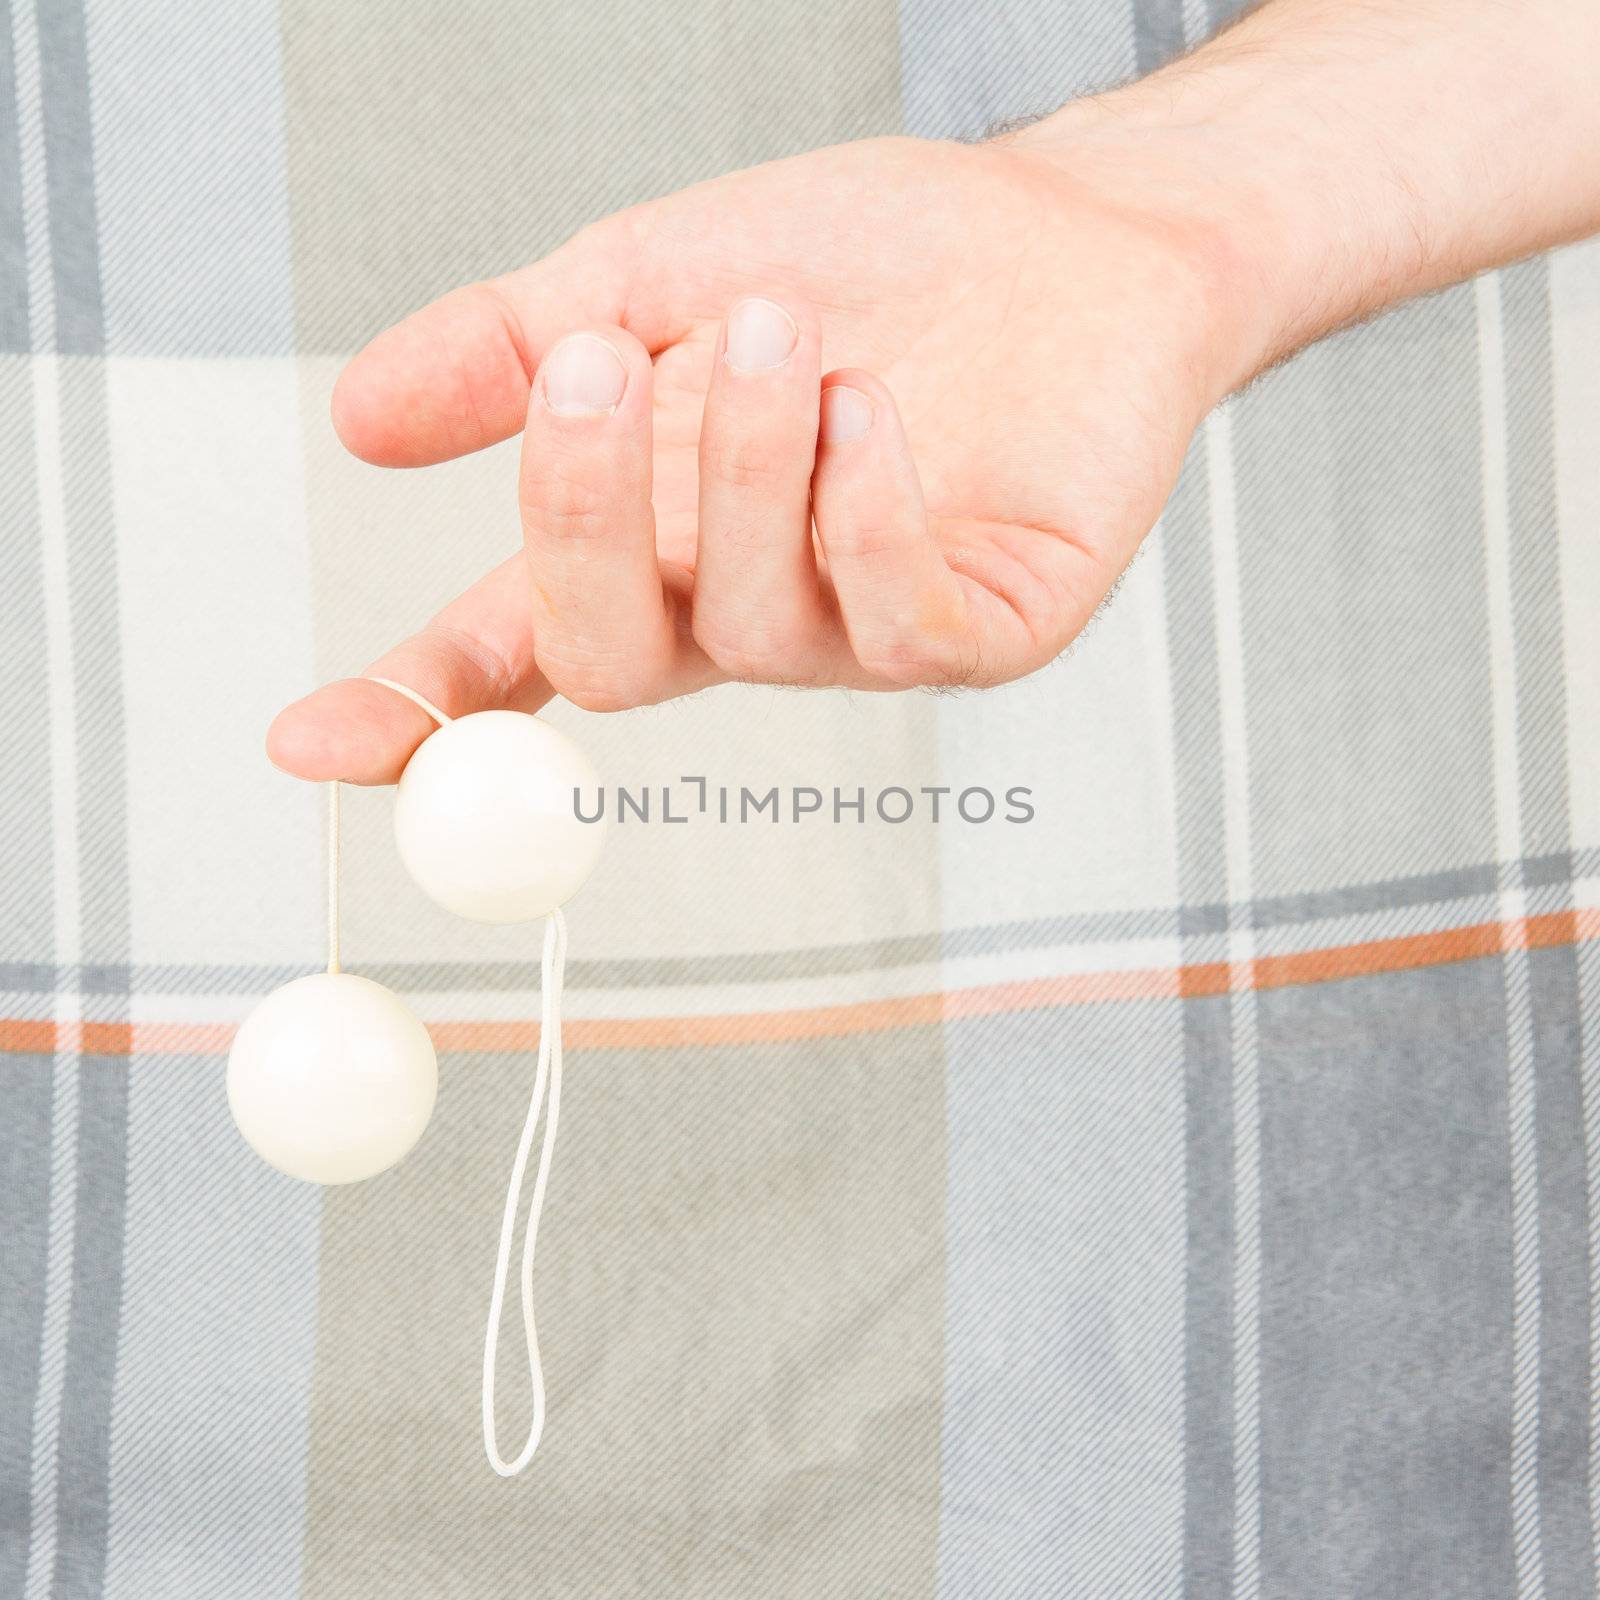 Hand holding white vaginal balls, isolated on an old quilt